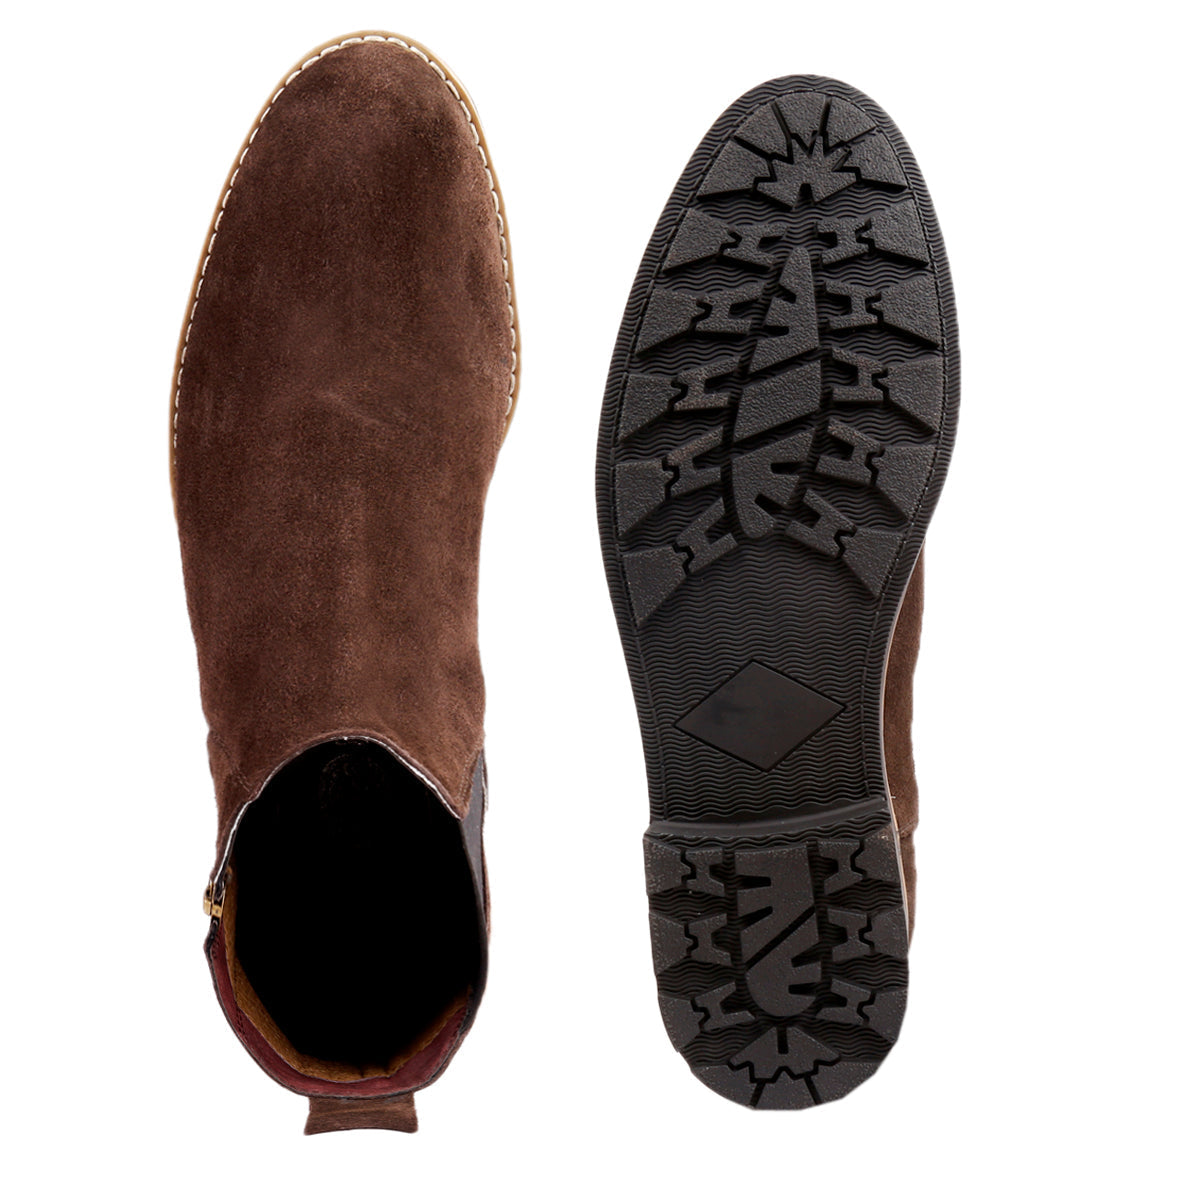 mens suede boots, men chelsea boots, best chelsea boots, leather suede boots